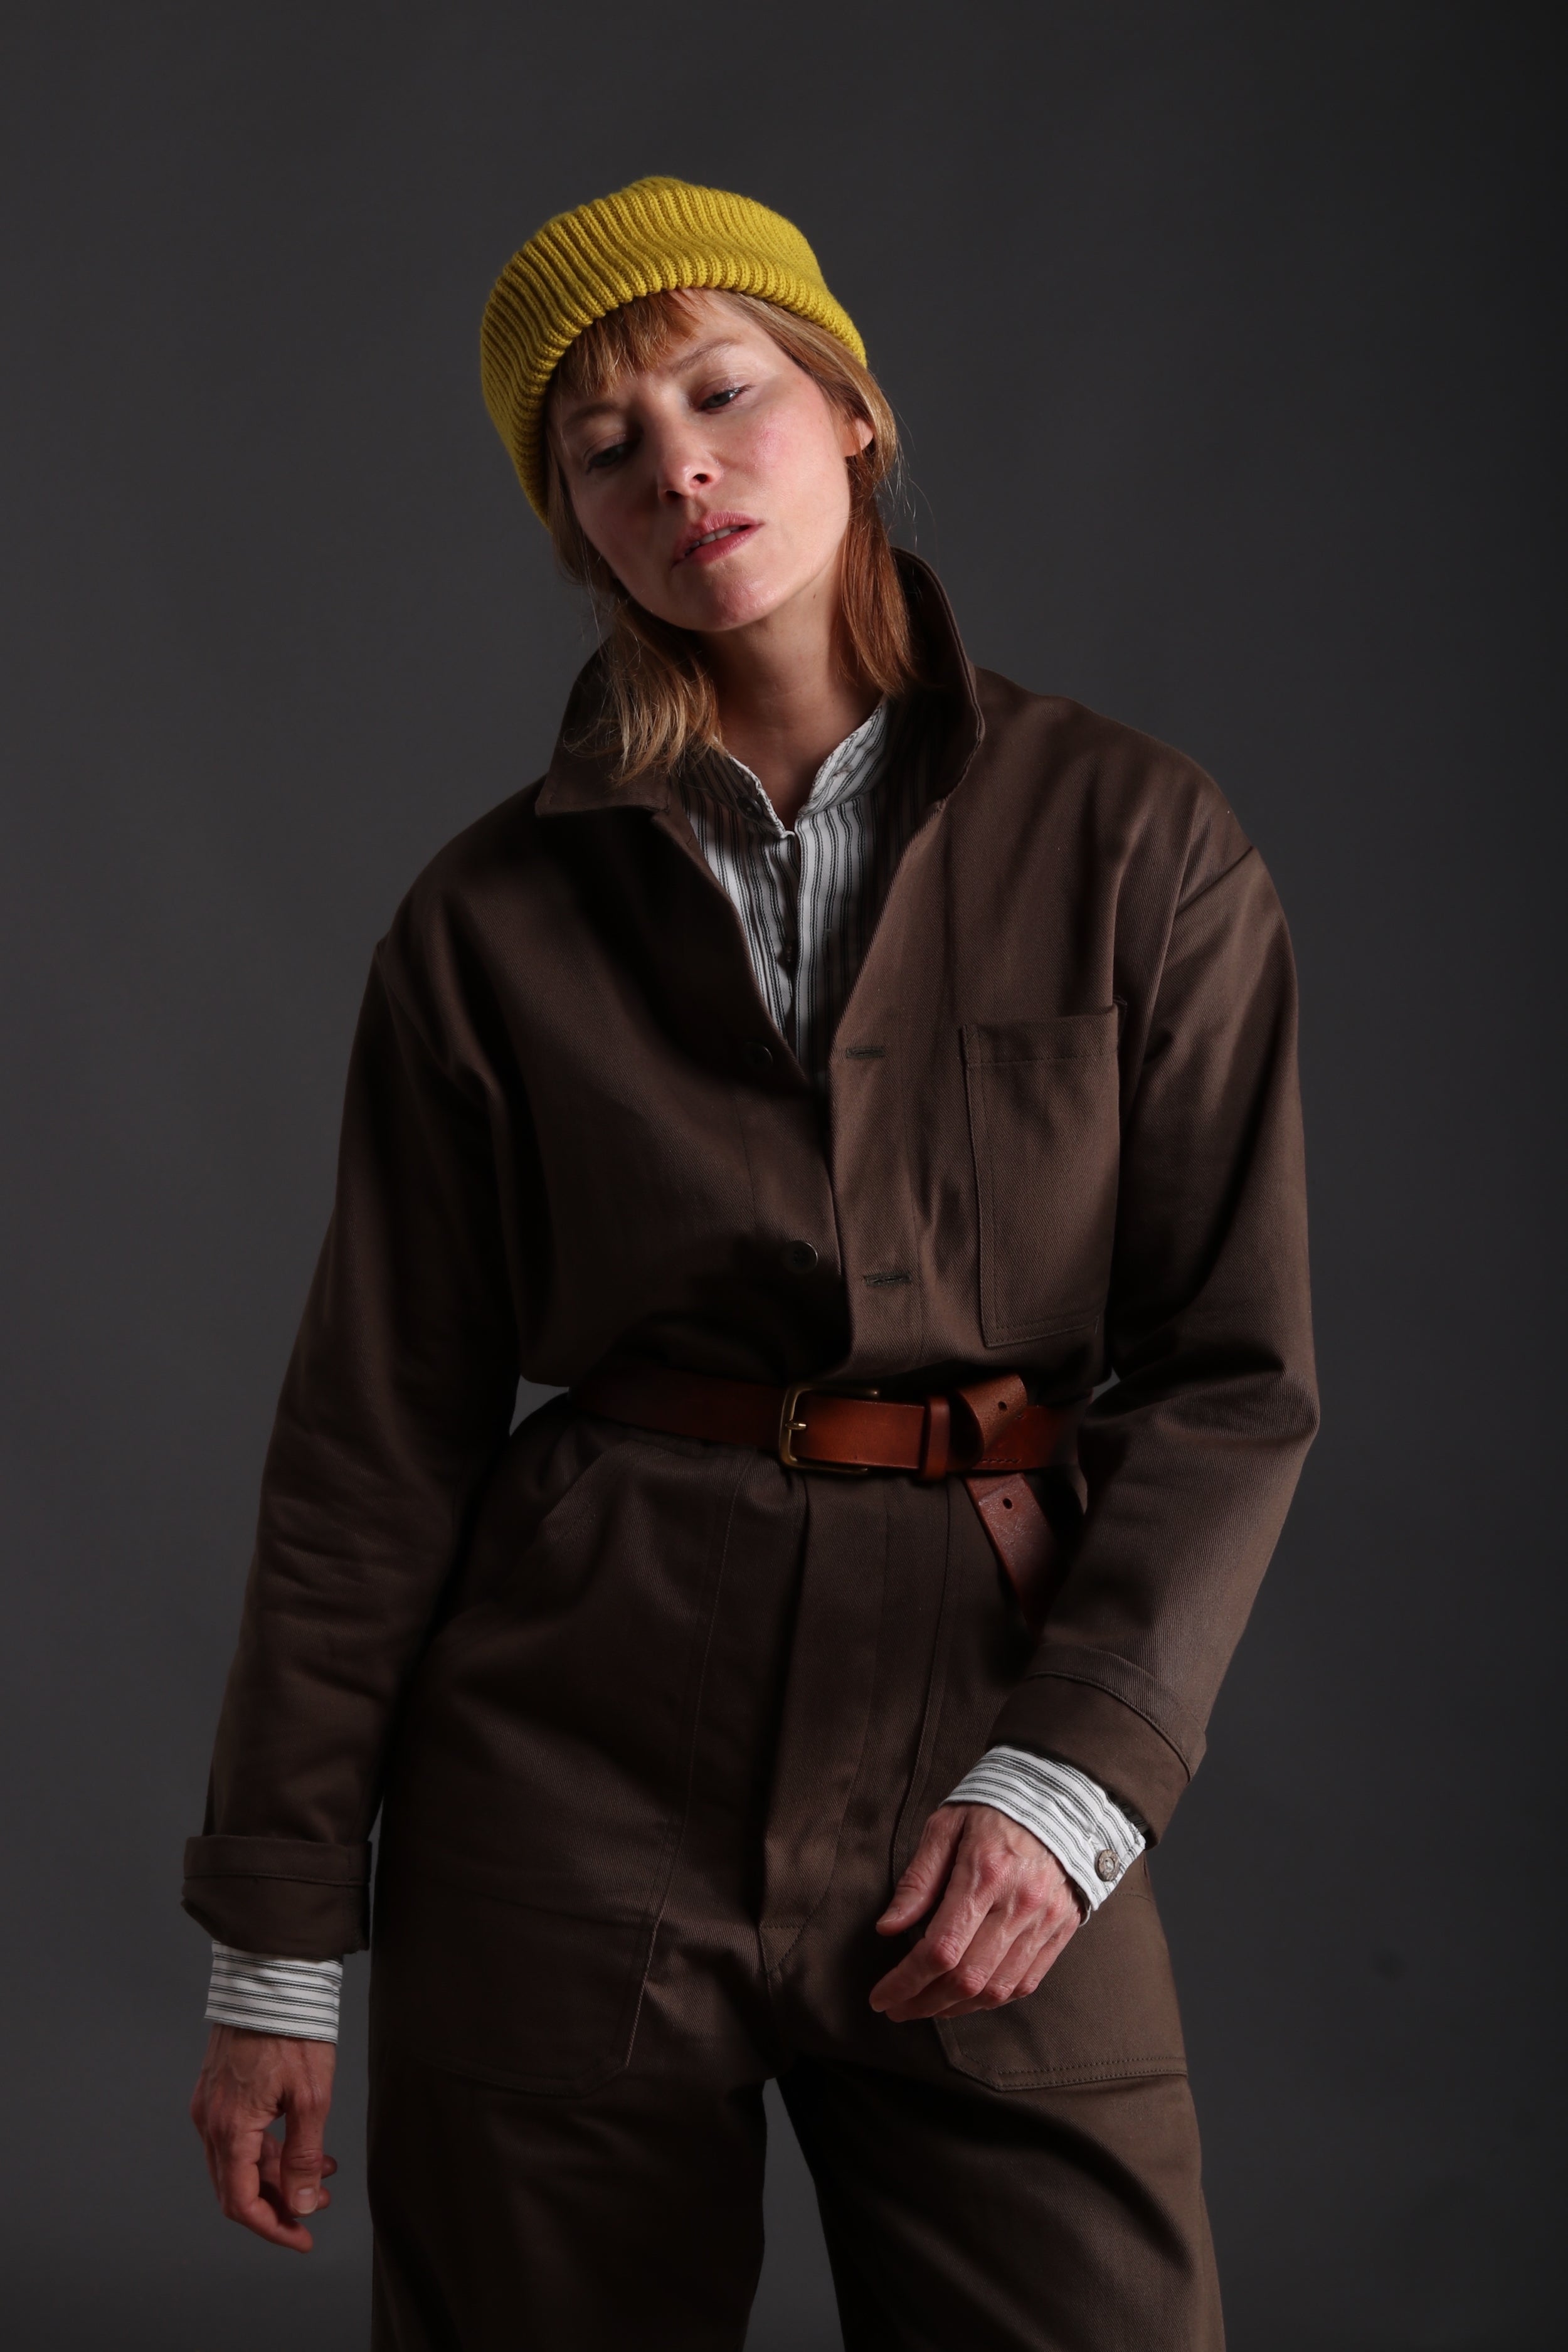 Sienna wears Carrier Company Boiler Suit in Olive Drill with Collarless Work Shirt in Ticking, Wool Hat and Chestnut Leather Belt